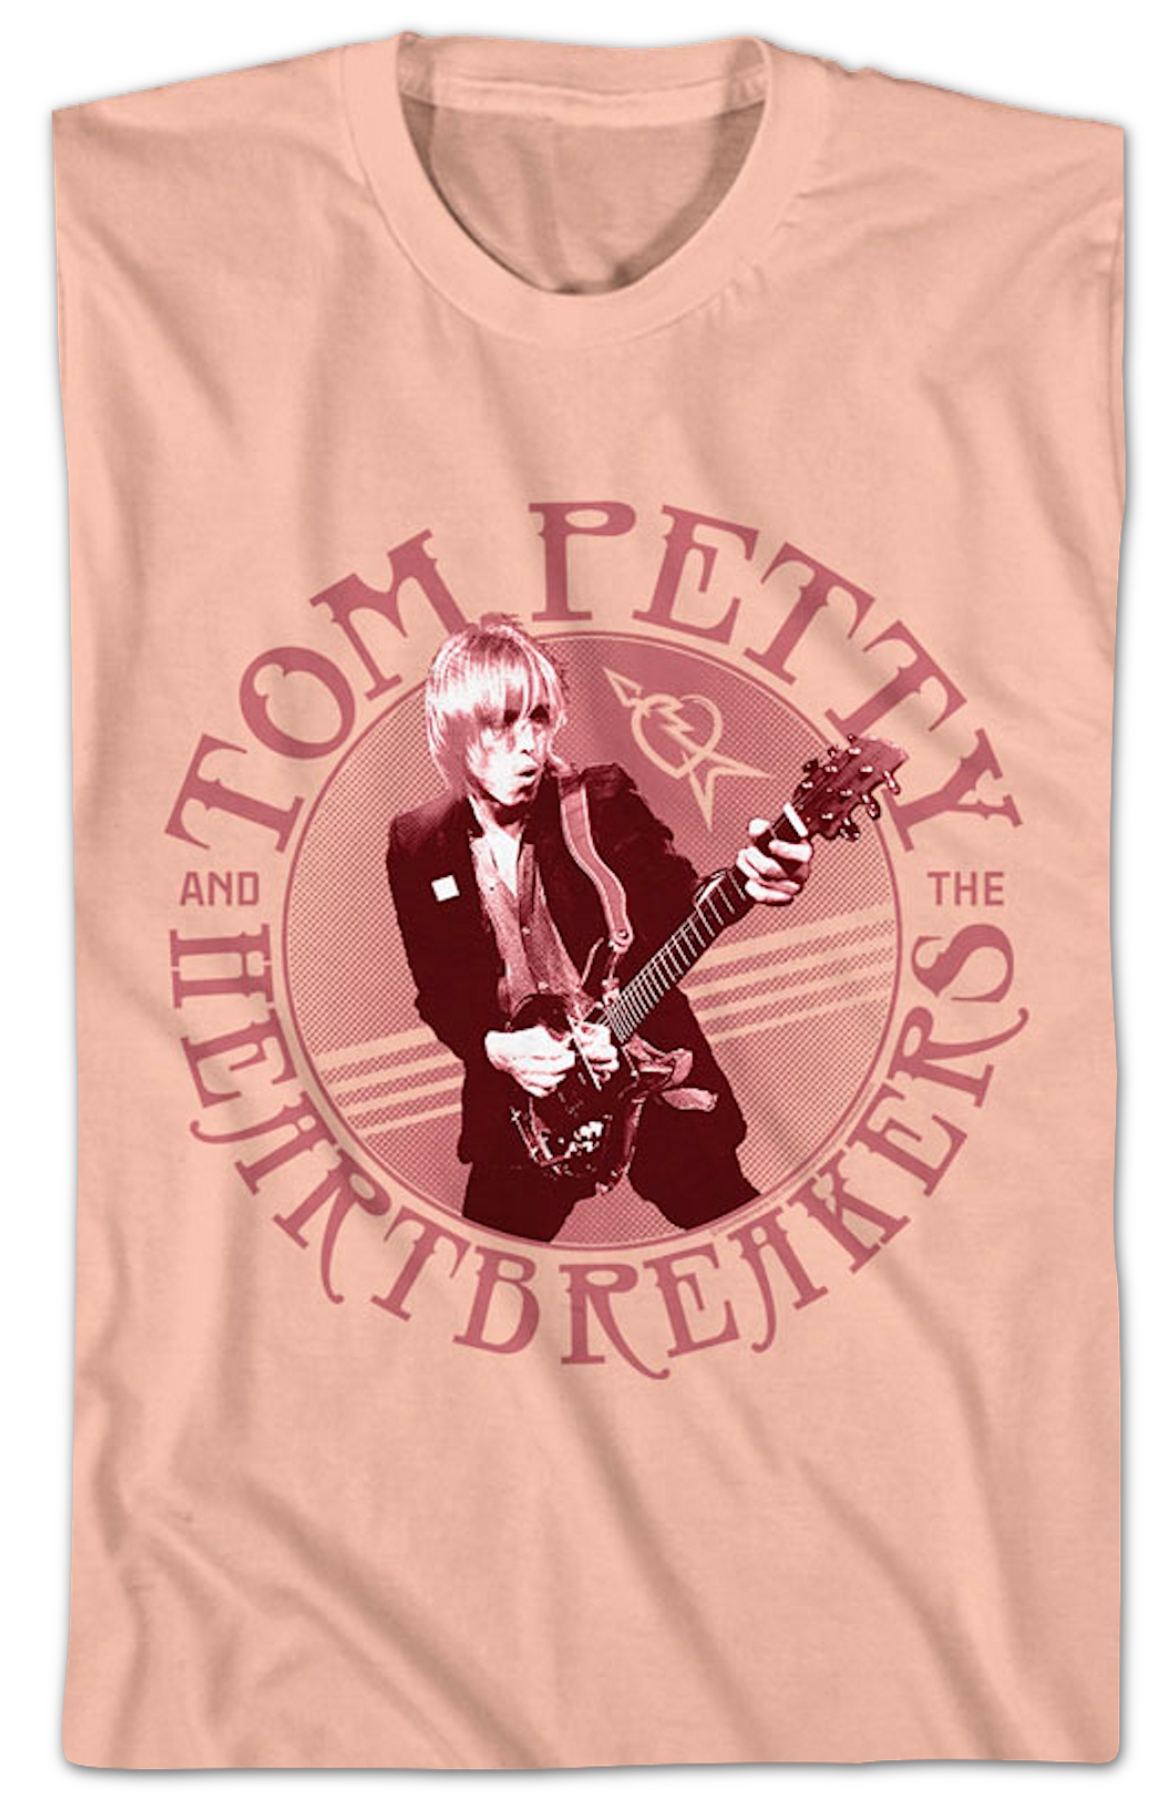 Tom Petty And The Heartbreakers T-Shirt